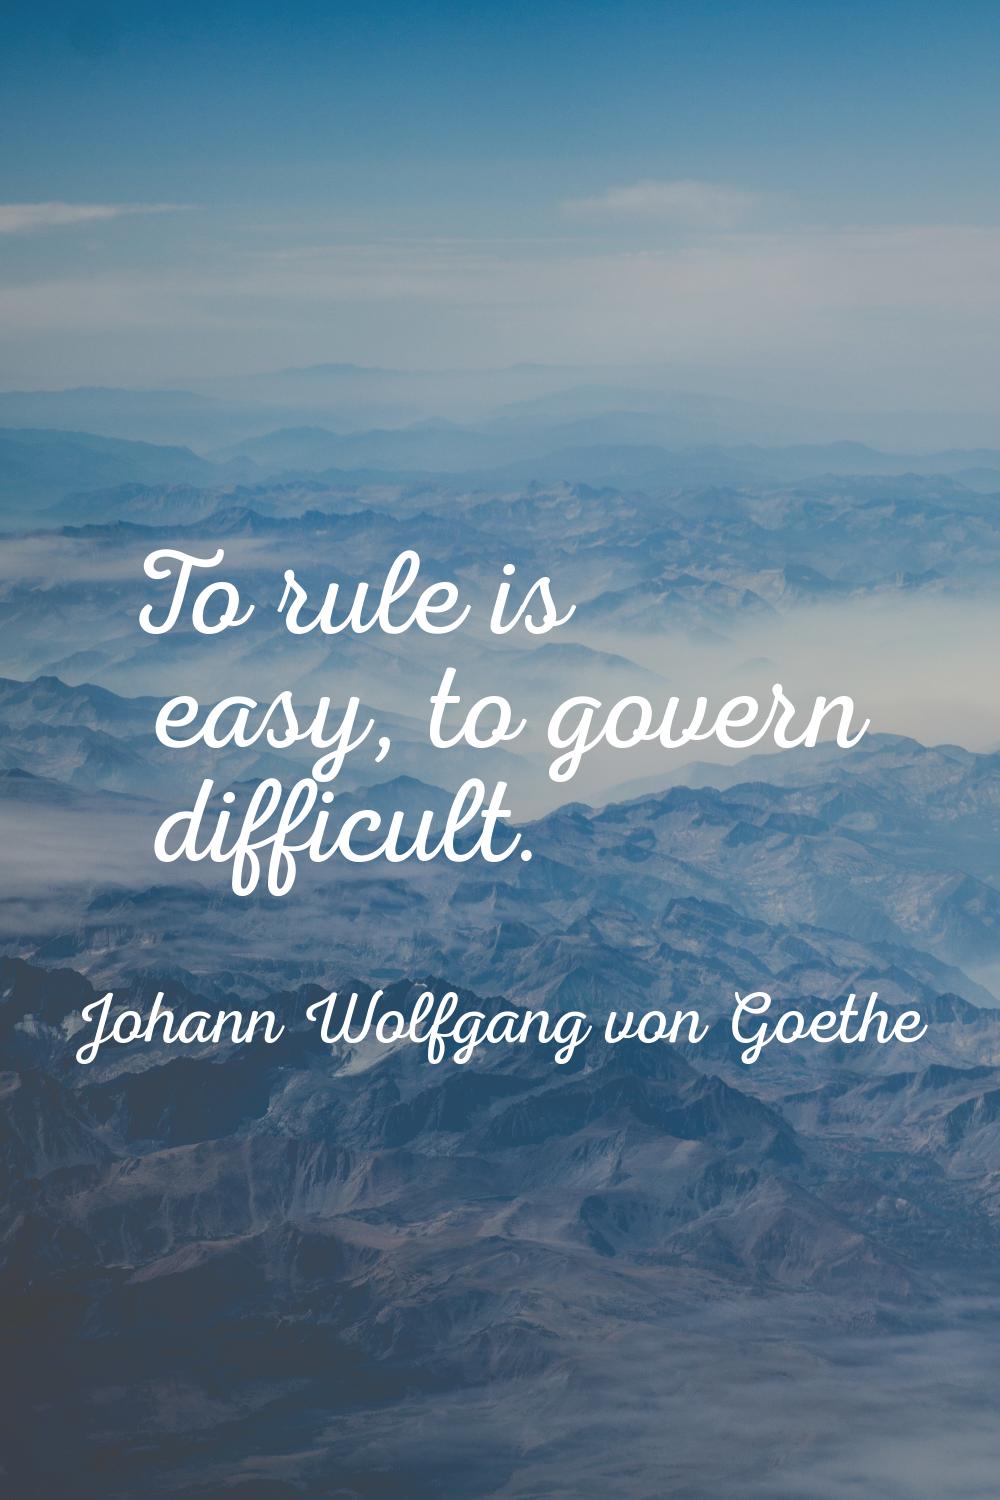 To rule is easy, to govern difficult.